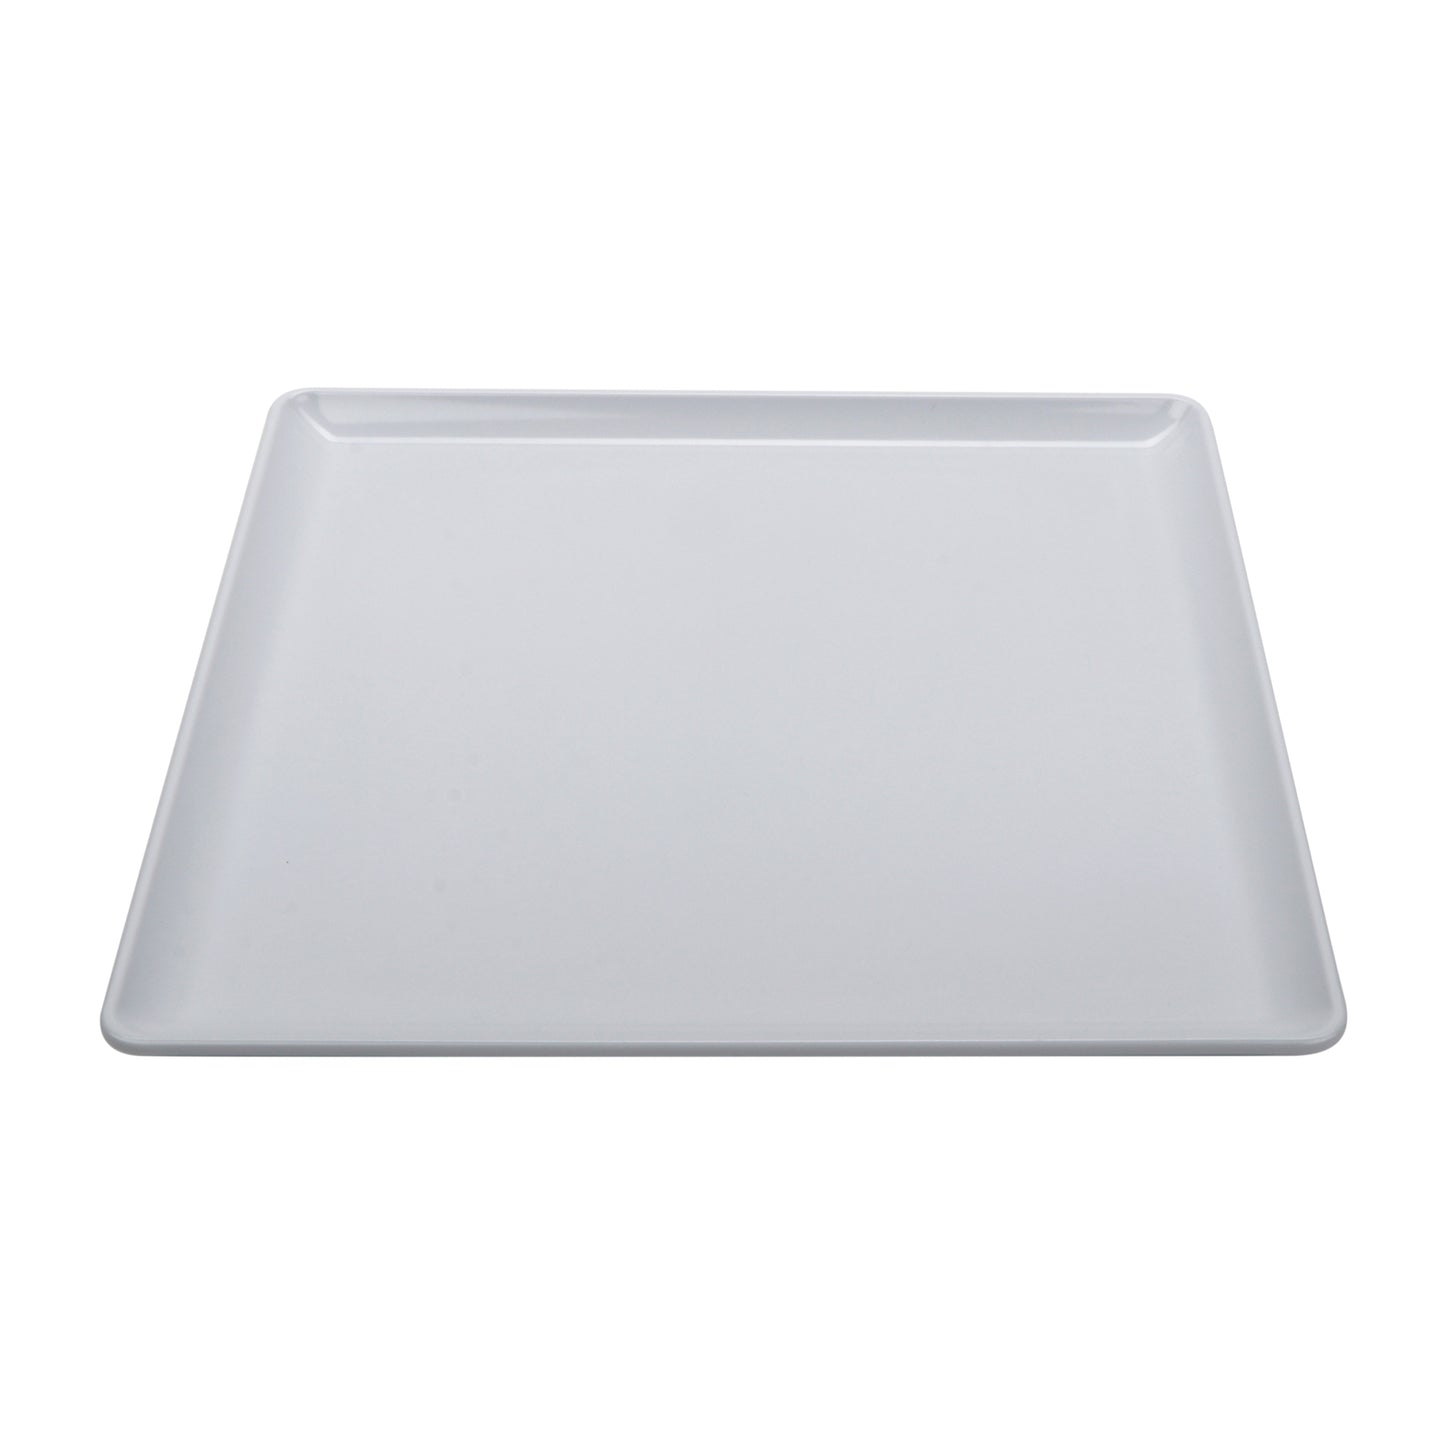 12" Melamine, White, Square Coupe Entree Plate, G.E.T. Midtown (12 Pack)